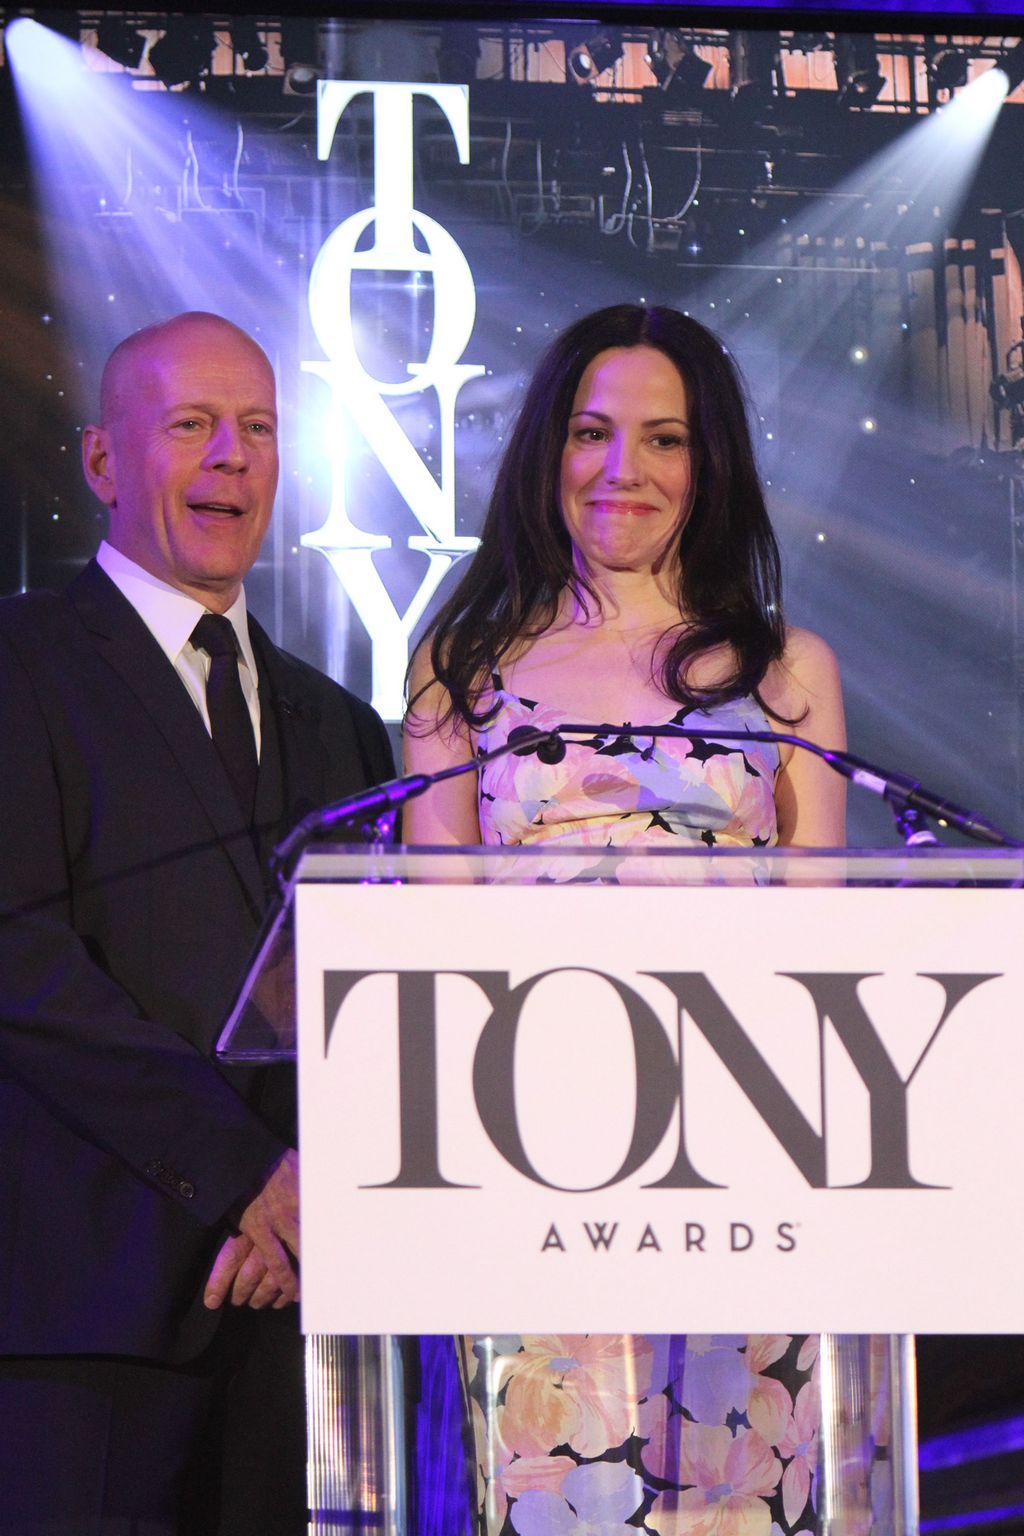 Bruce Willis and Mary-Louise Parker at Tony Awards Nominations Announcement